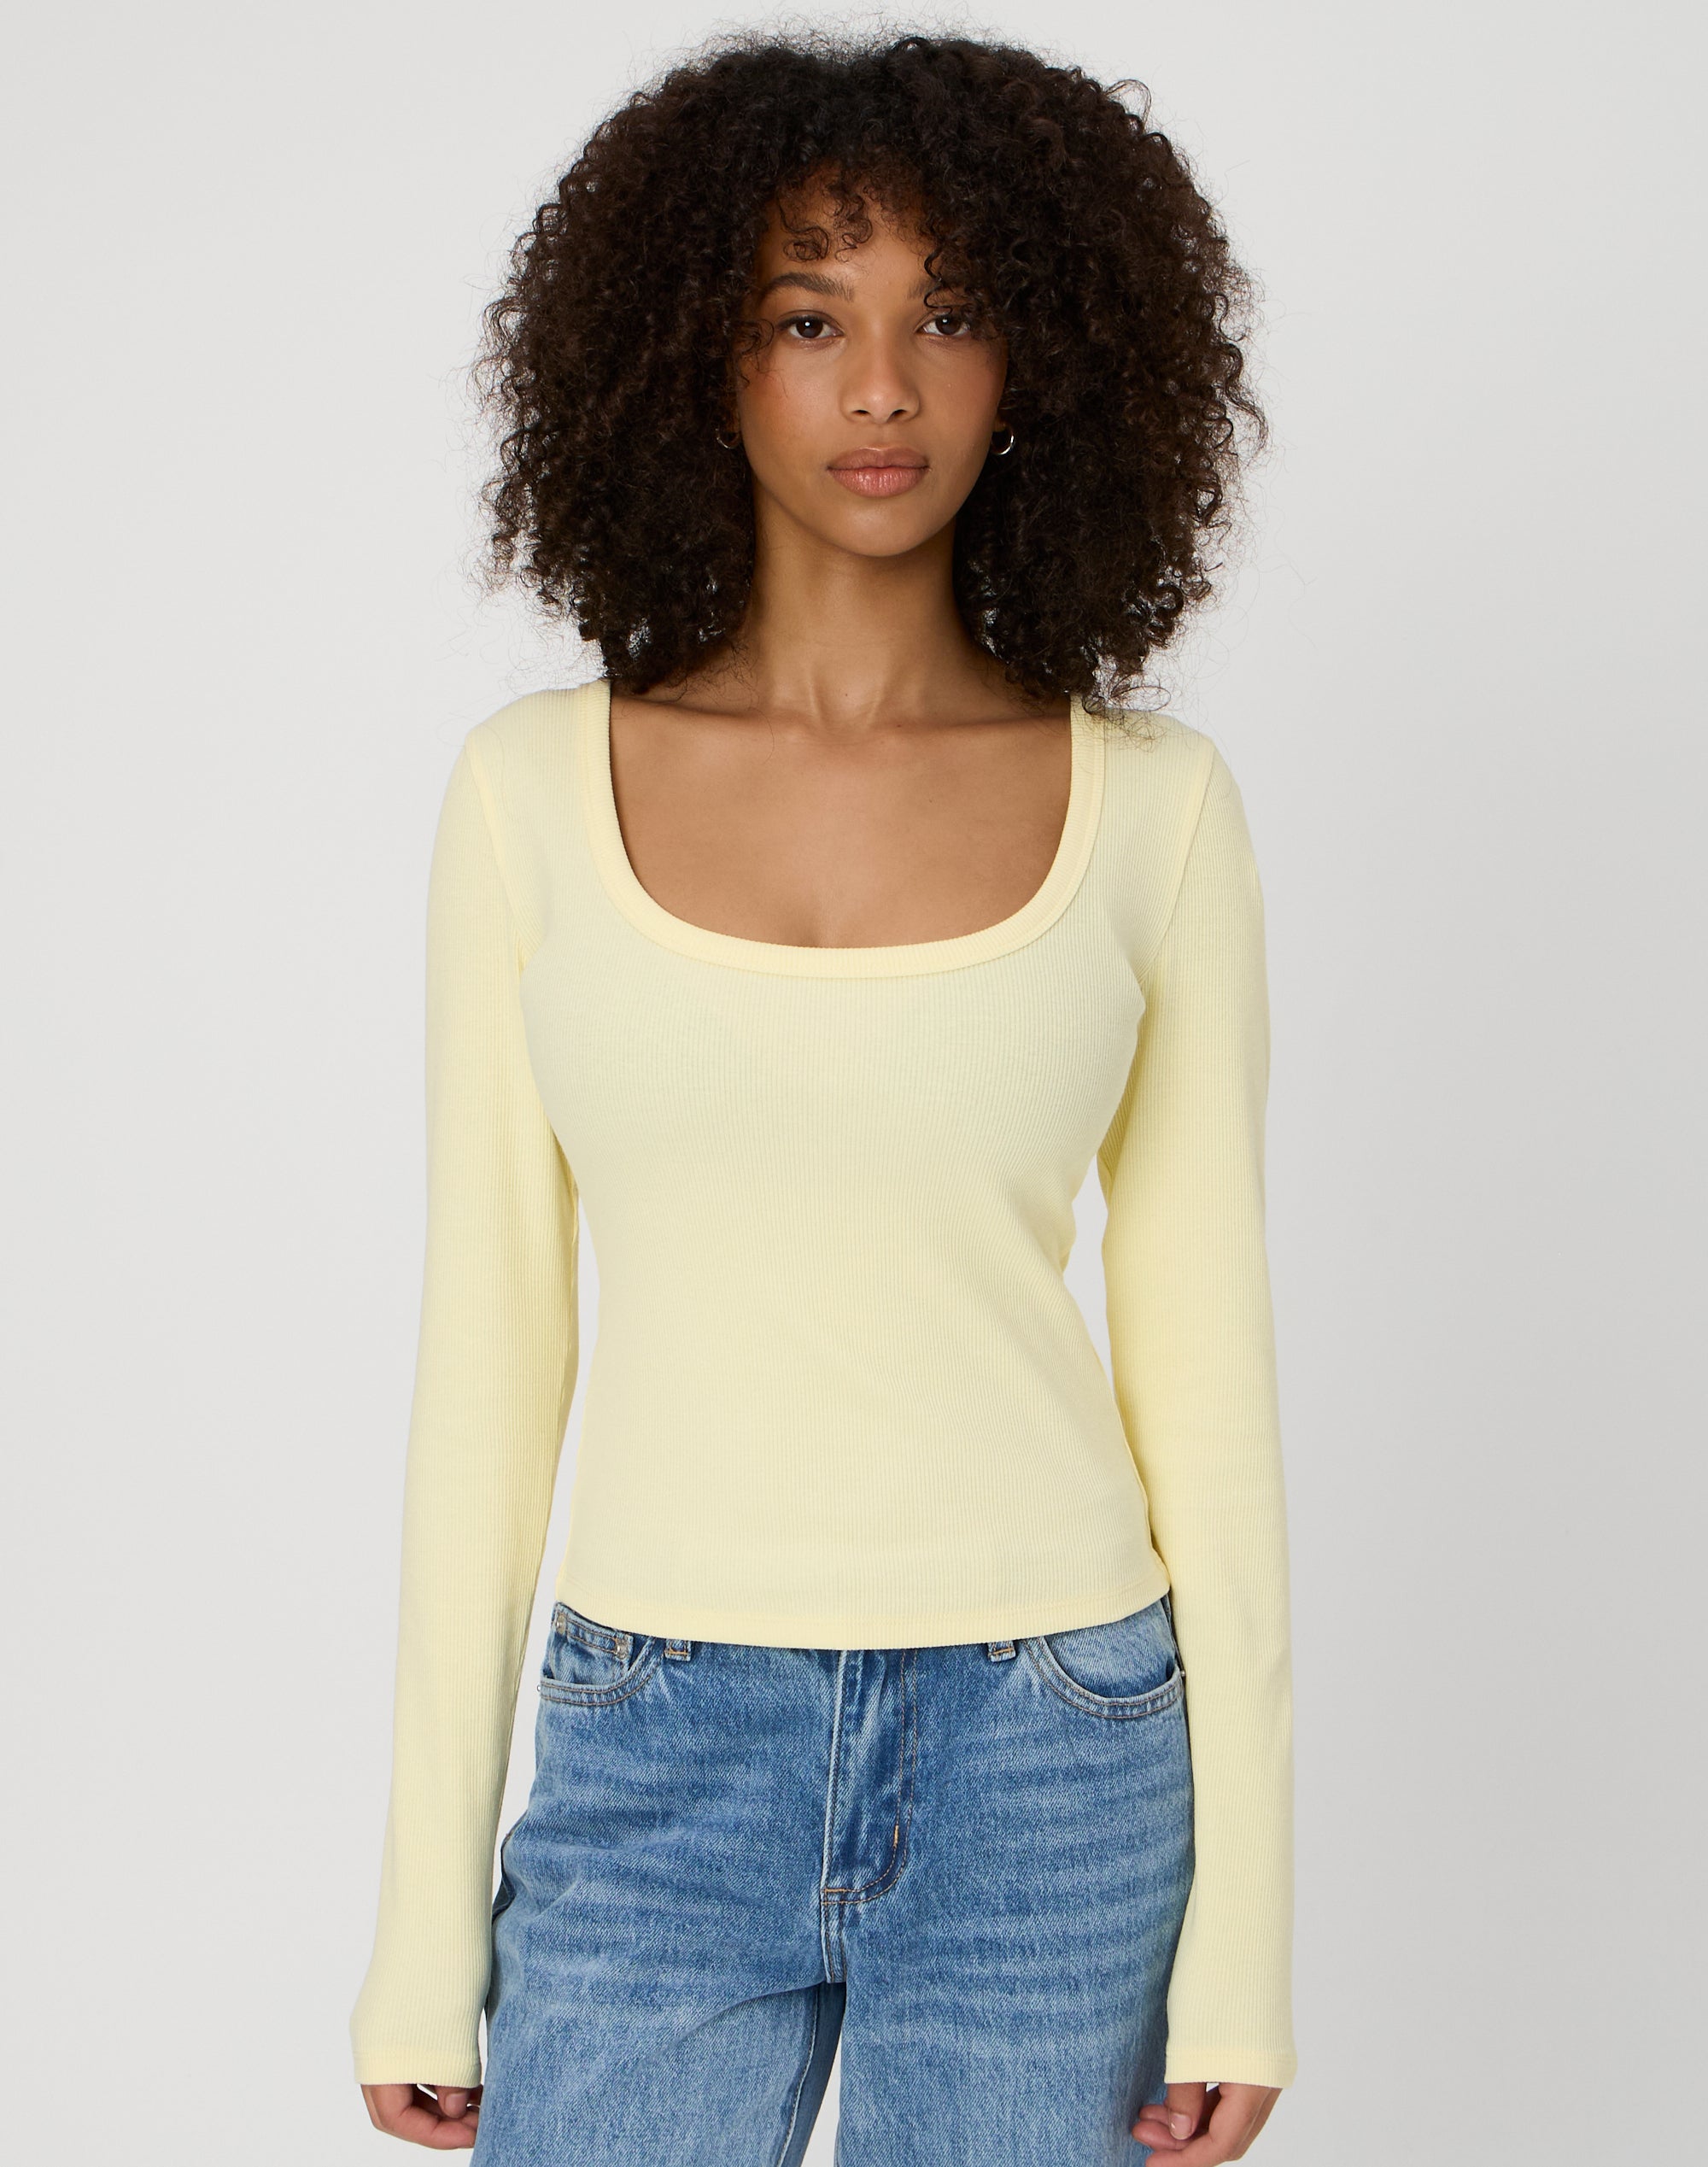 Ribbed Scoop Neck Long Sleeve Top in Yellow Jessamine